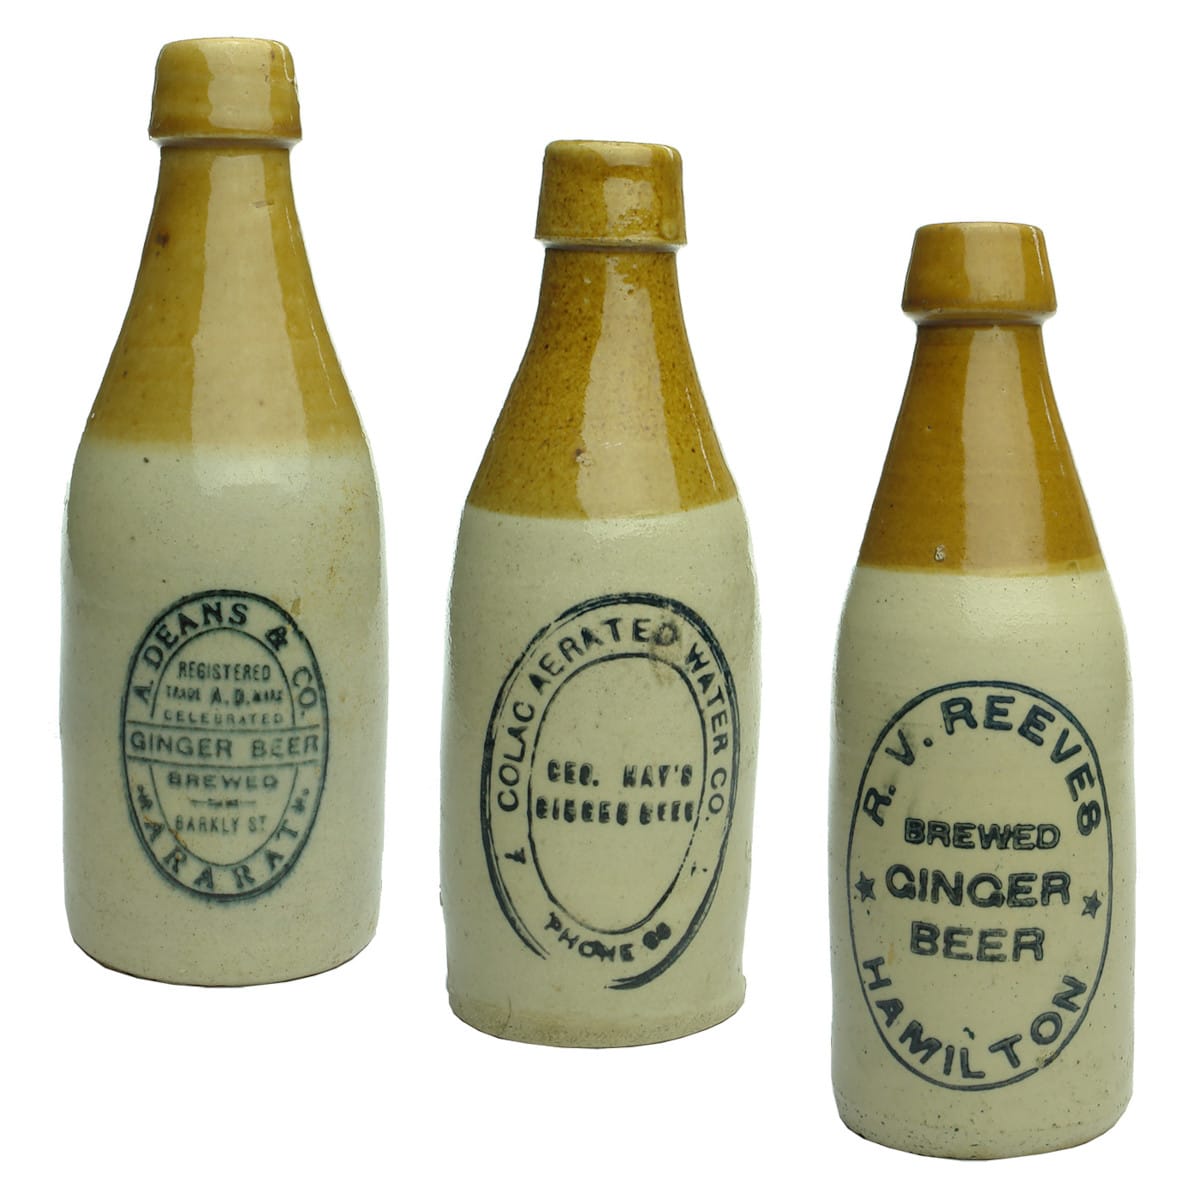 Three Ginger Beers. A. Deans & Co., Ararat; Colac Aerated Water Co, Geo. Hay's; Reeves, Hamilton. Champagne. Tan Top. (Victoria)